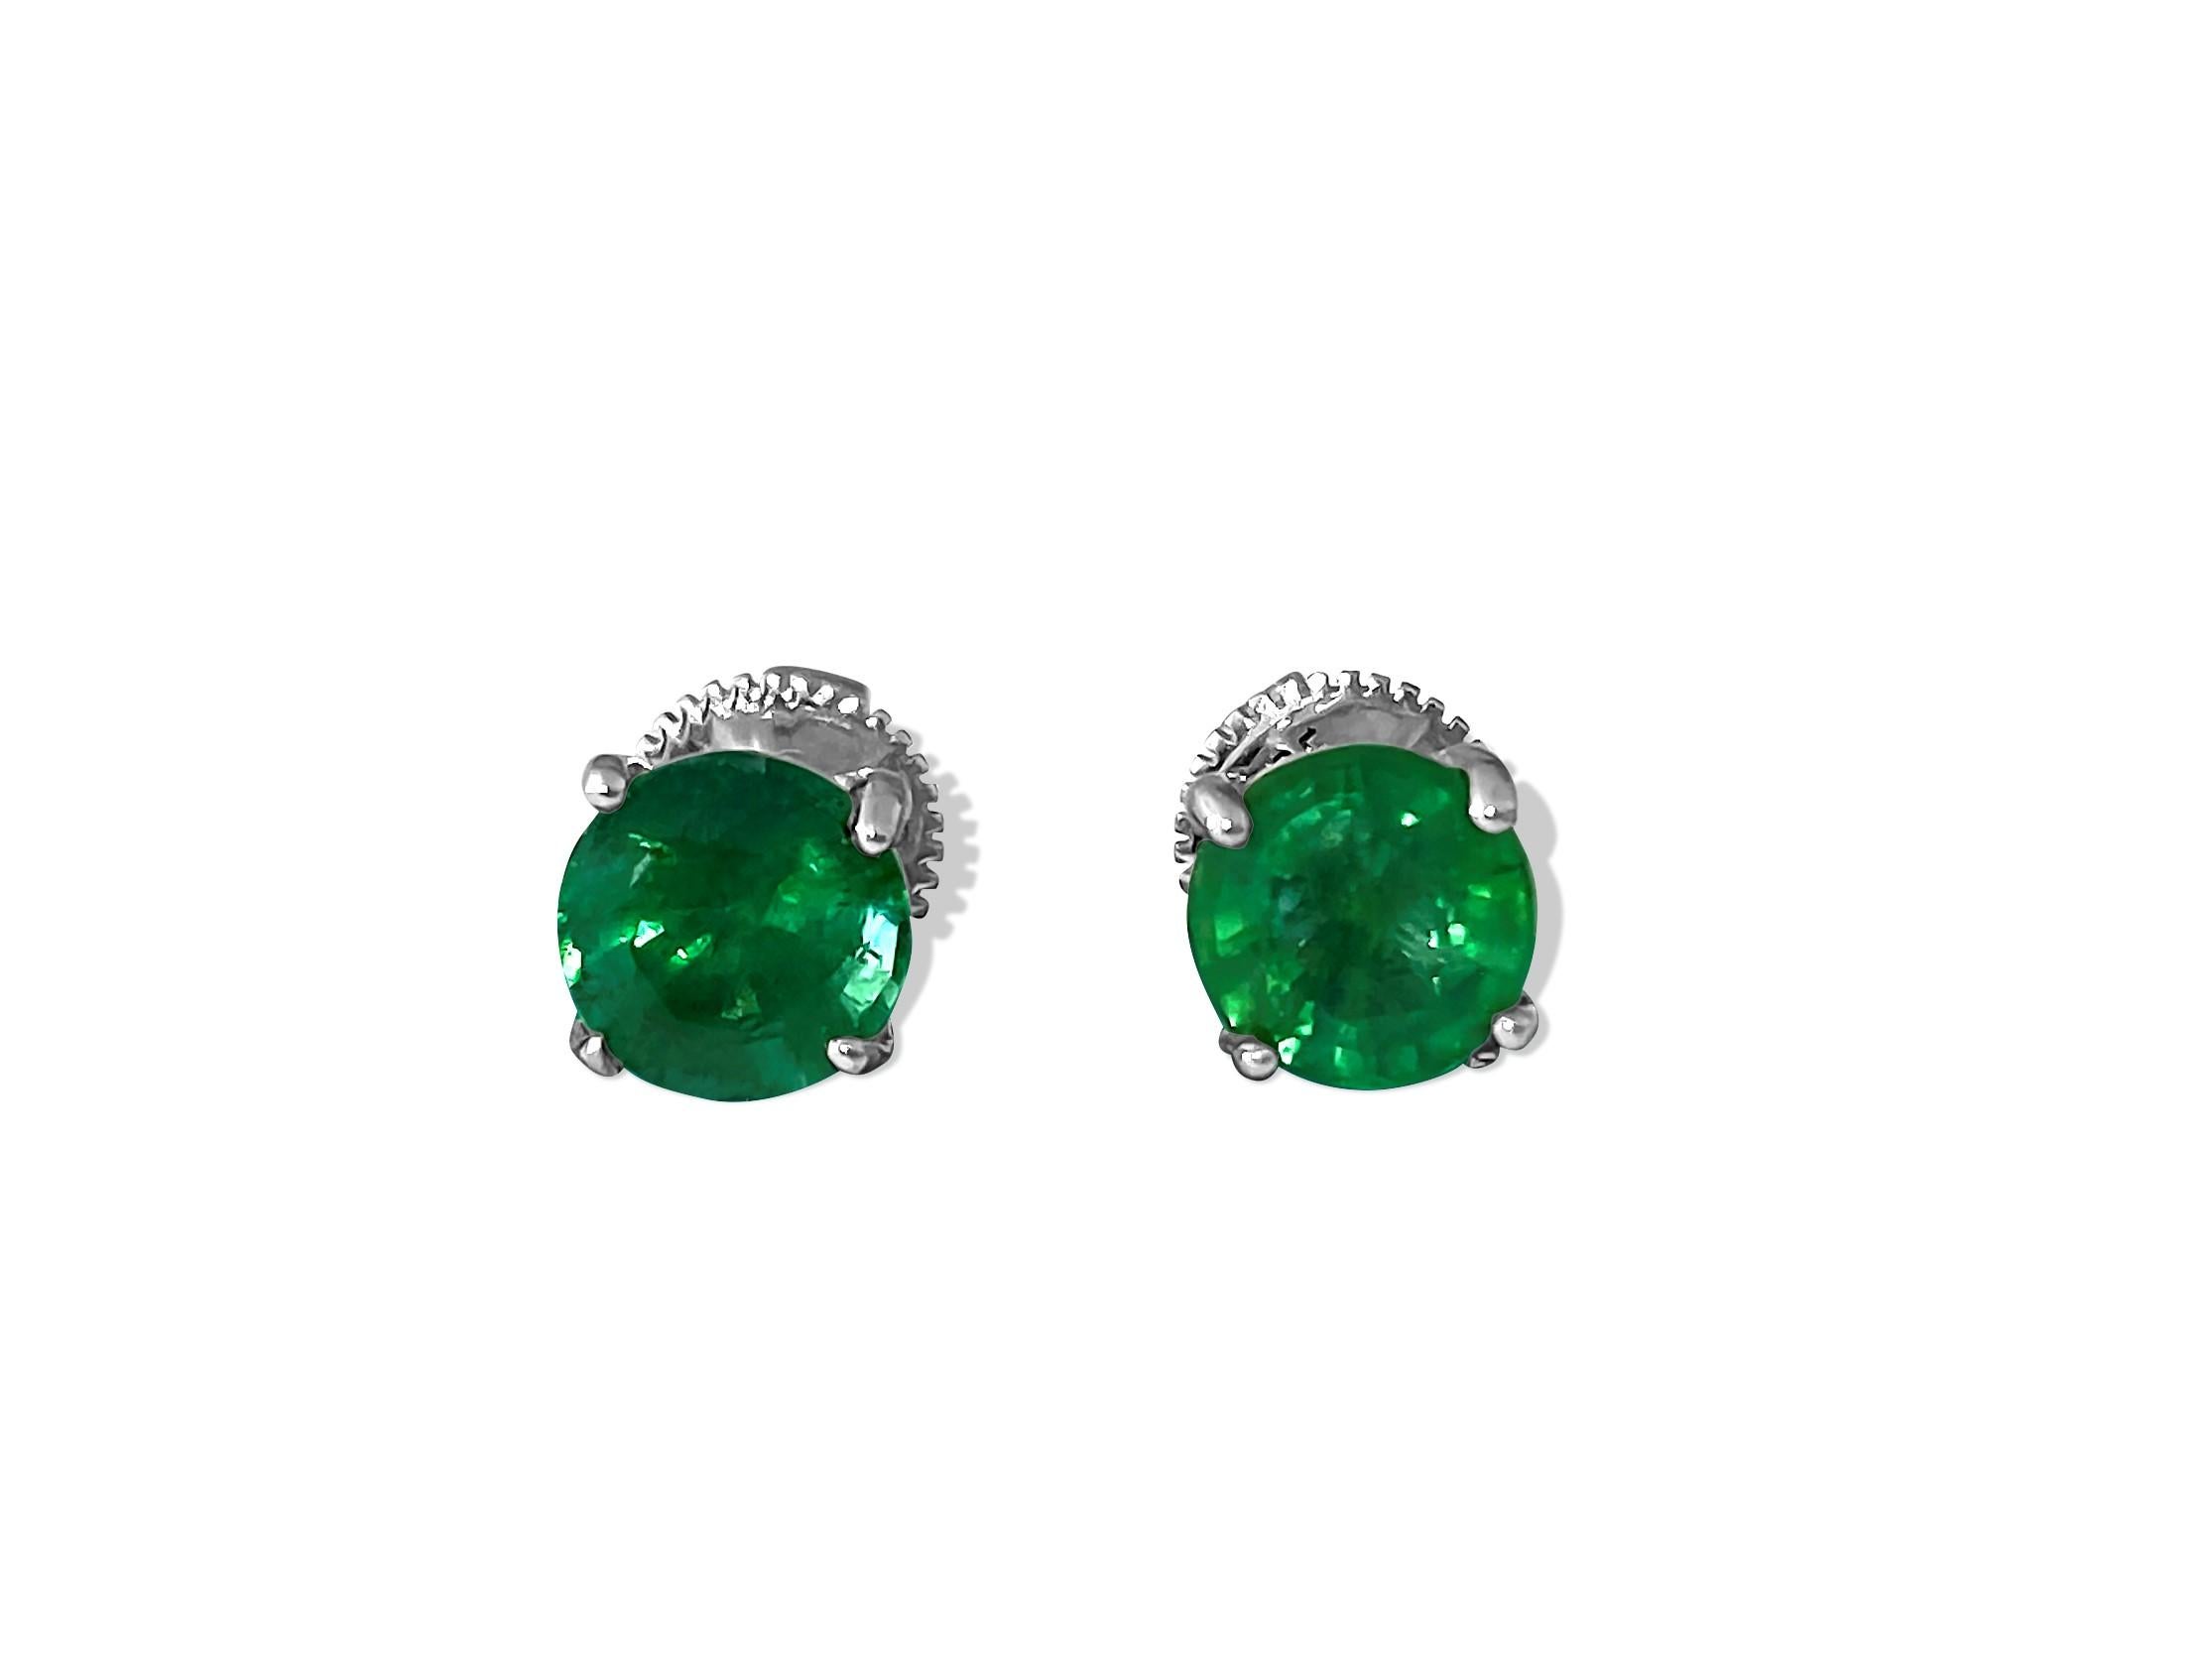 14k Gold 2.50 Carat Emerald Diamond Stud Earrings In Excellent Condition For Sale In Miami, FL